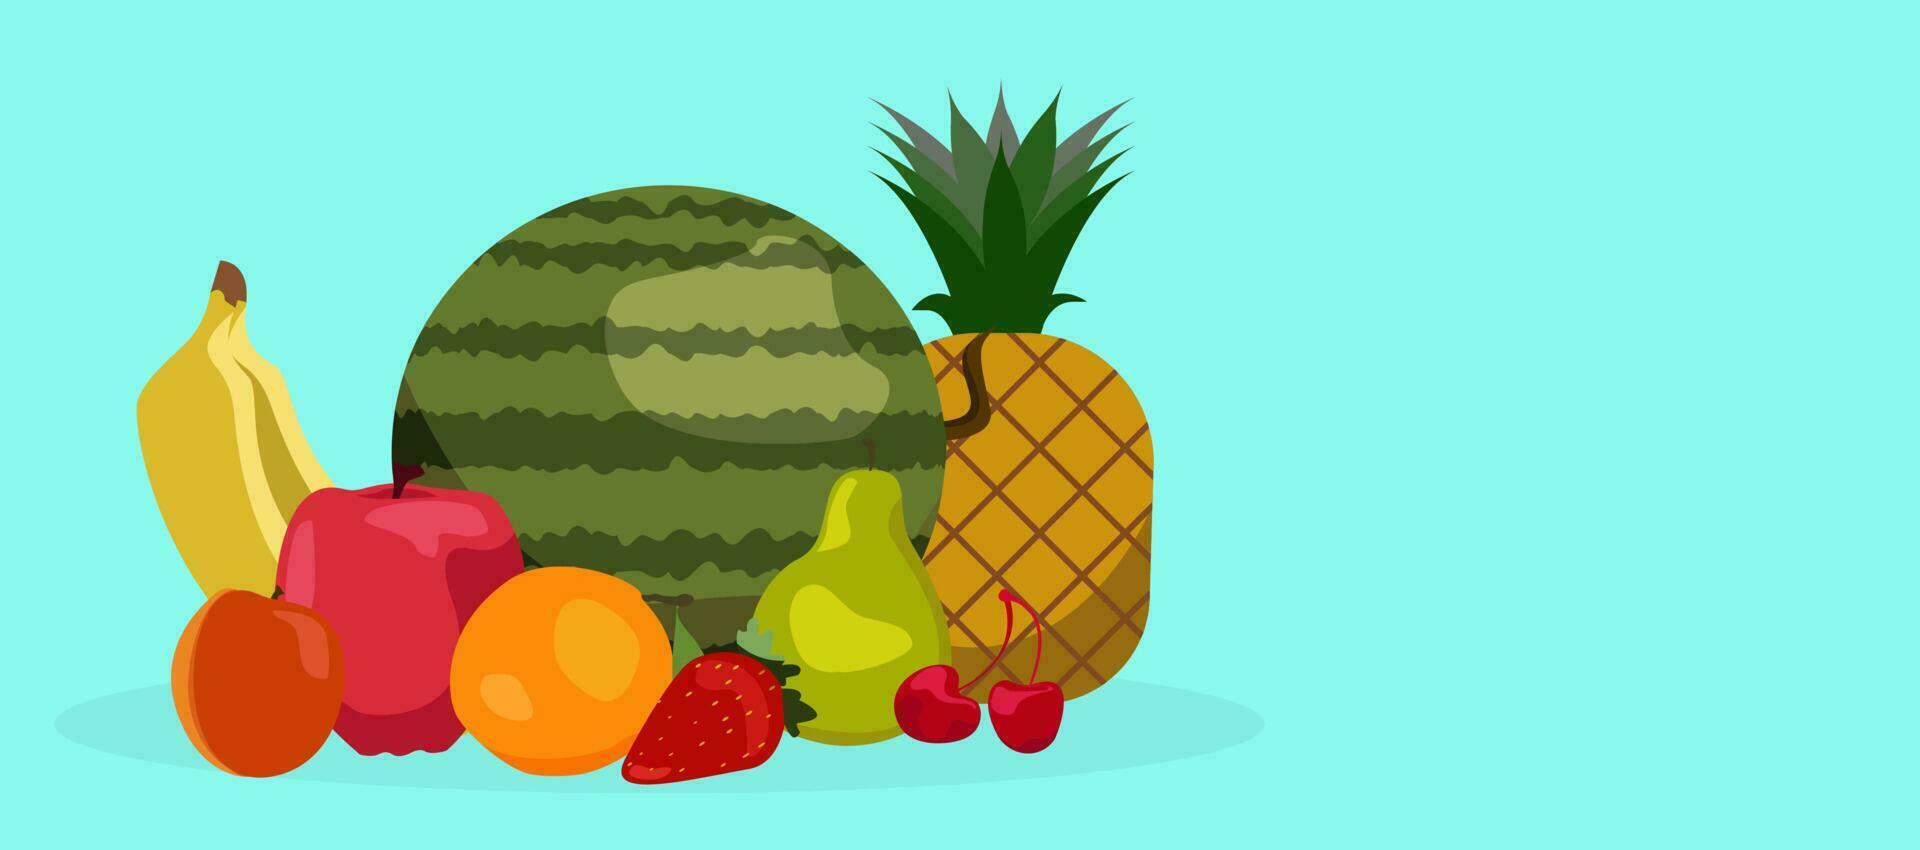 Fruit and berries vector banner. Vegetarian Food set with blue background. Strawberries, banana and pomegranate Illustation of fruit Pineapple or Apple. Orange, Watermelon apricot, pear, cherry.